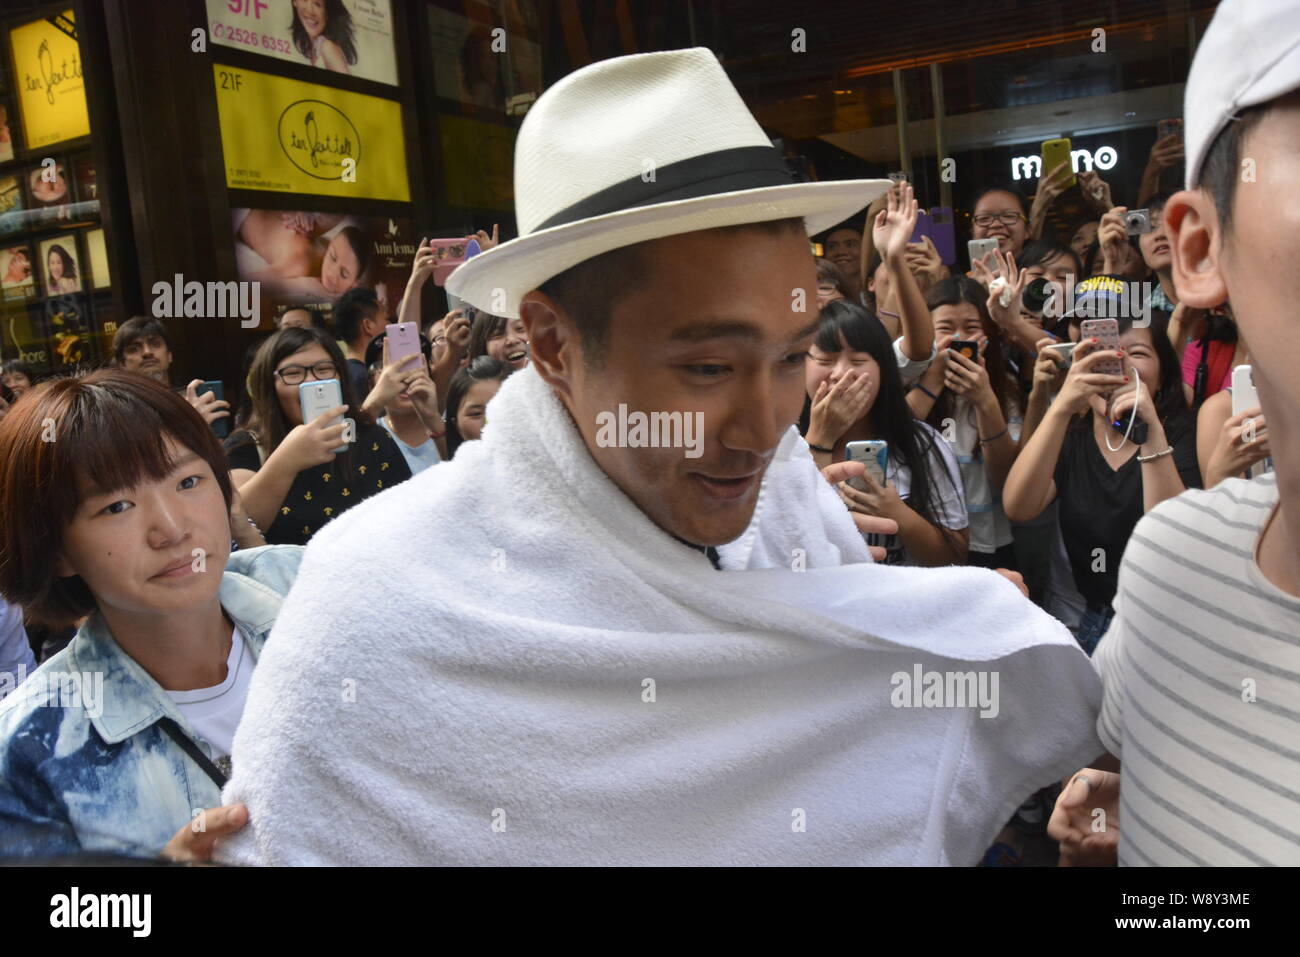 Choi Siwon of South Korean pop group Super Junior, center, is wrapped up with a towel after braving the Ice Bucket Challenge in Central, Hong Kong, Ch Stock Photo